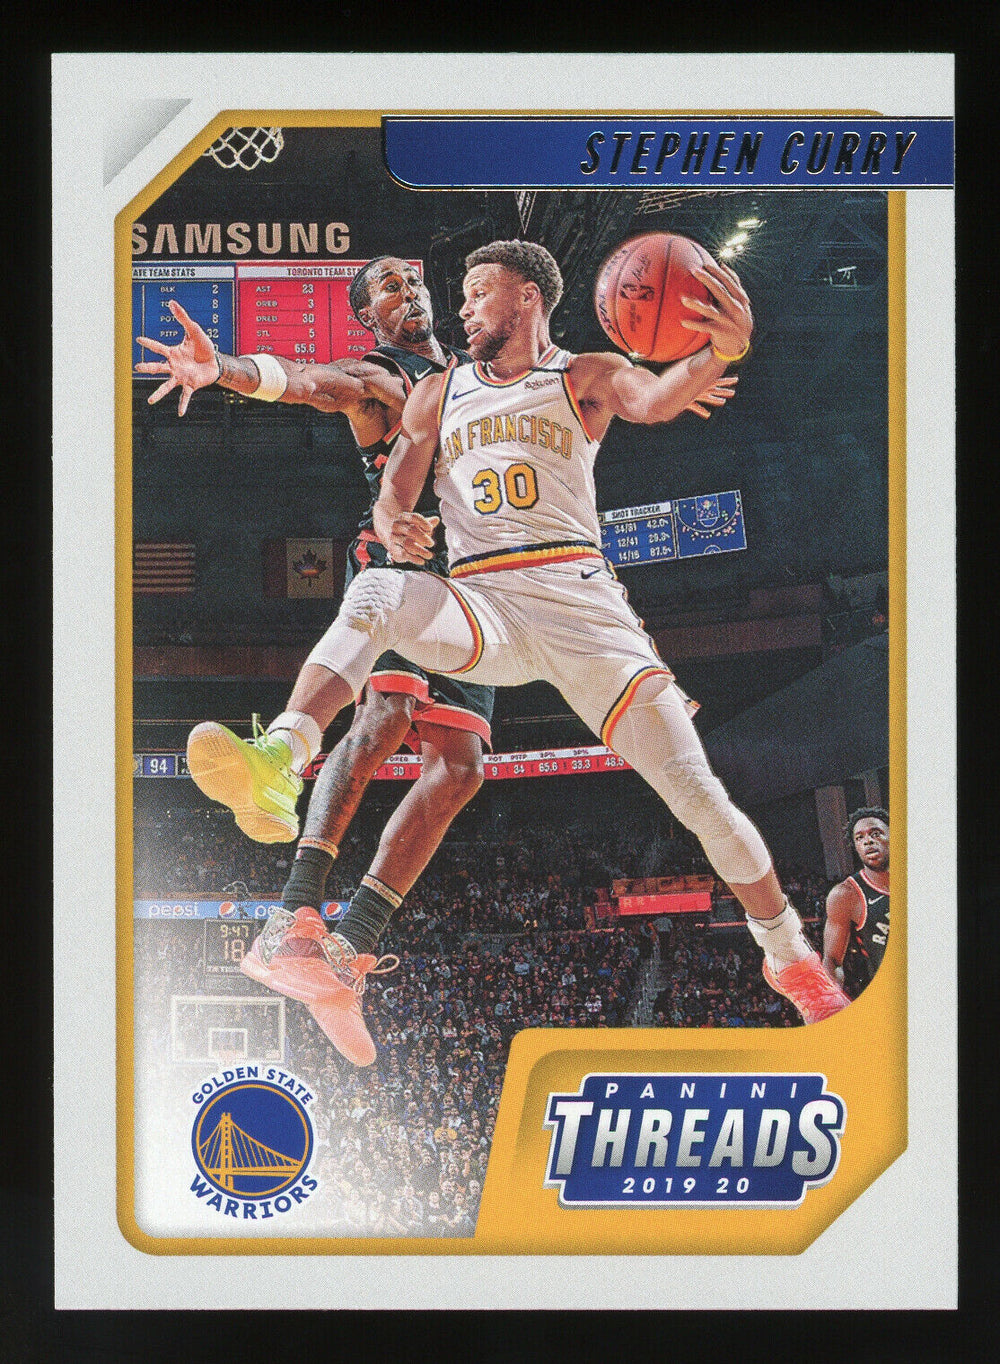 Stephen Curry 2019 2020 Panini Chronicles Threads Series Mint Card #79